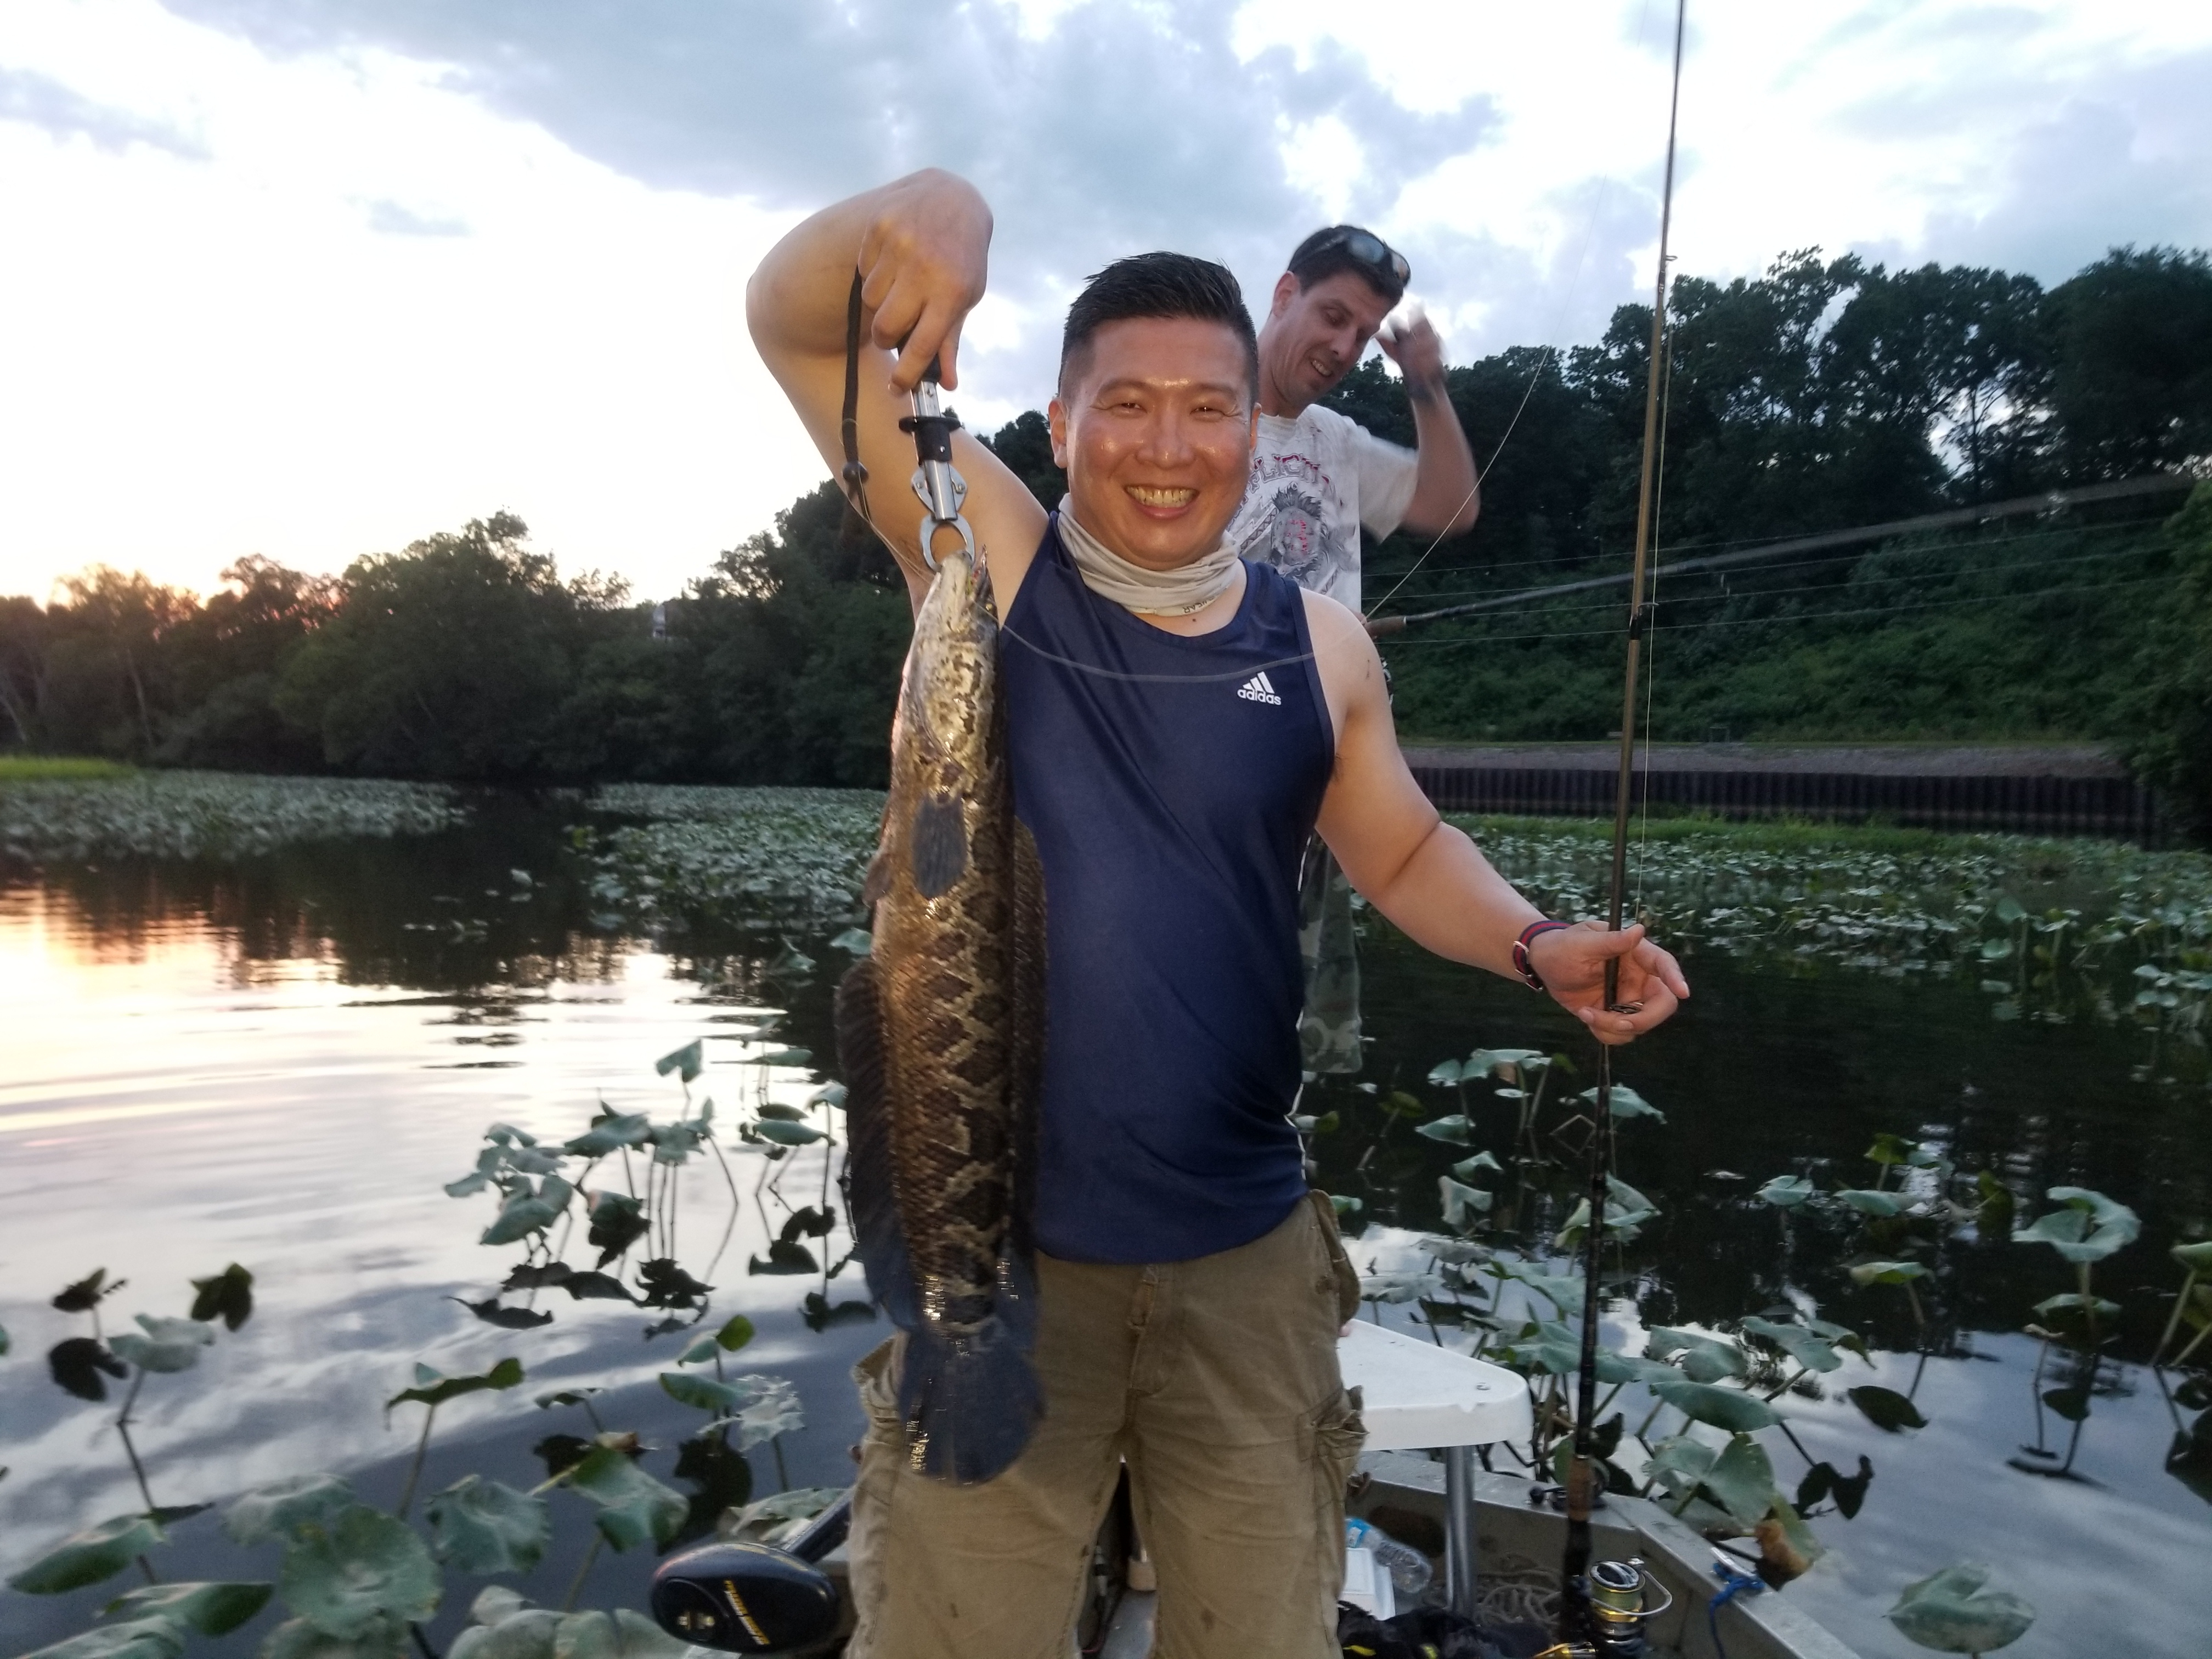 https://indianheadcharters.com/wp-content/uploads/2019/06/Jerrys-1st-snakehead.jpg